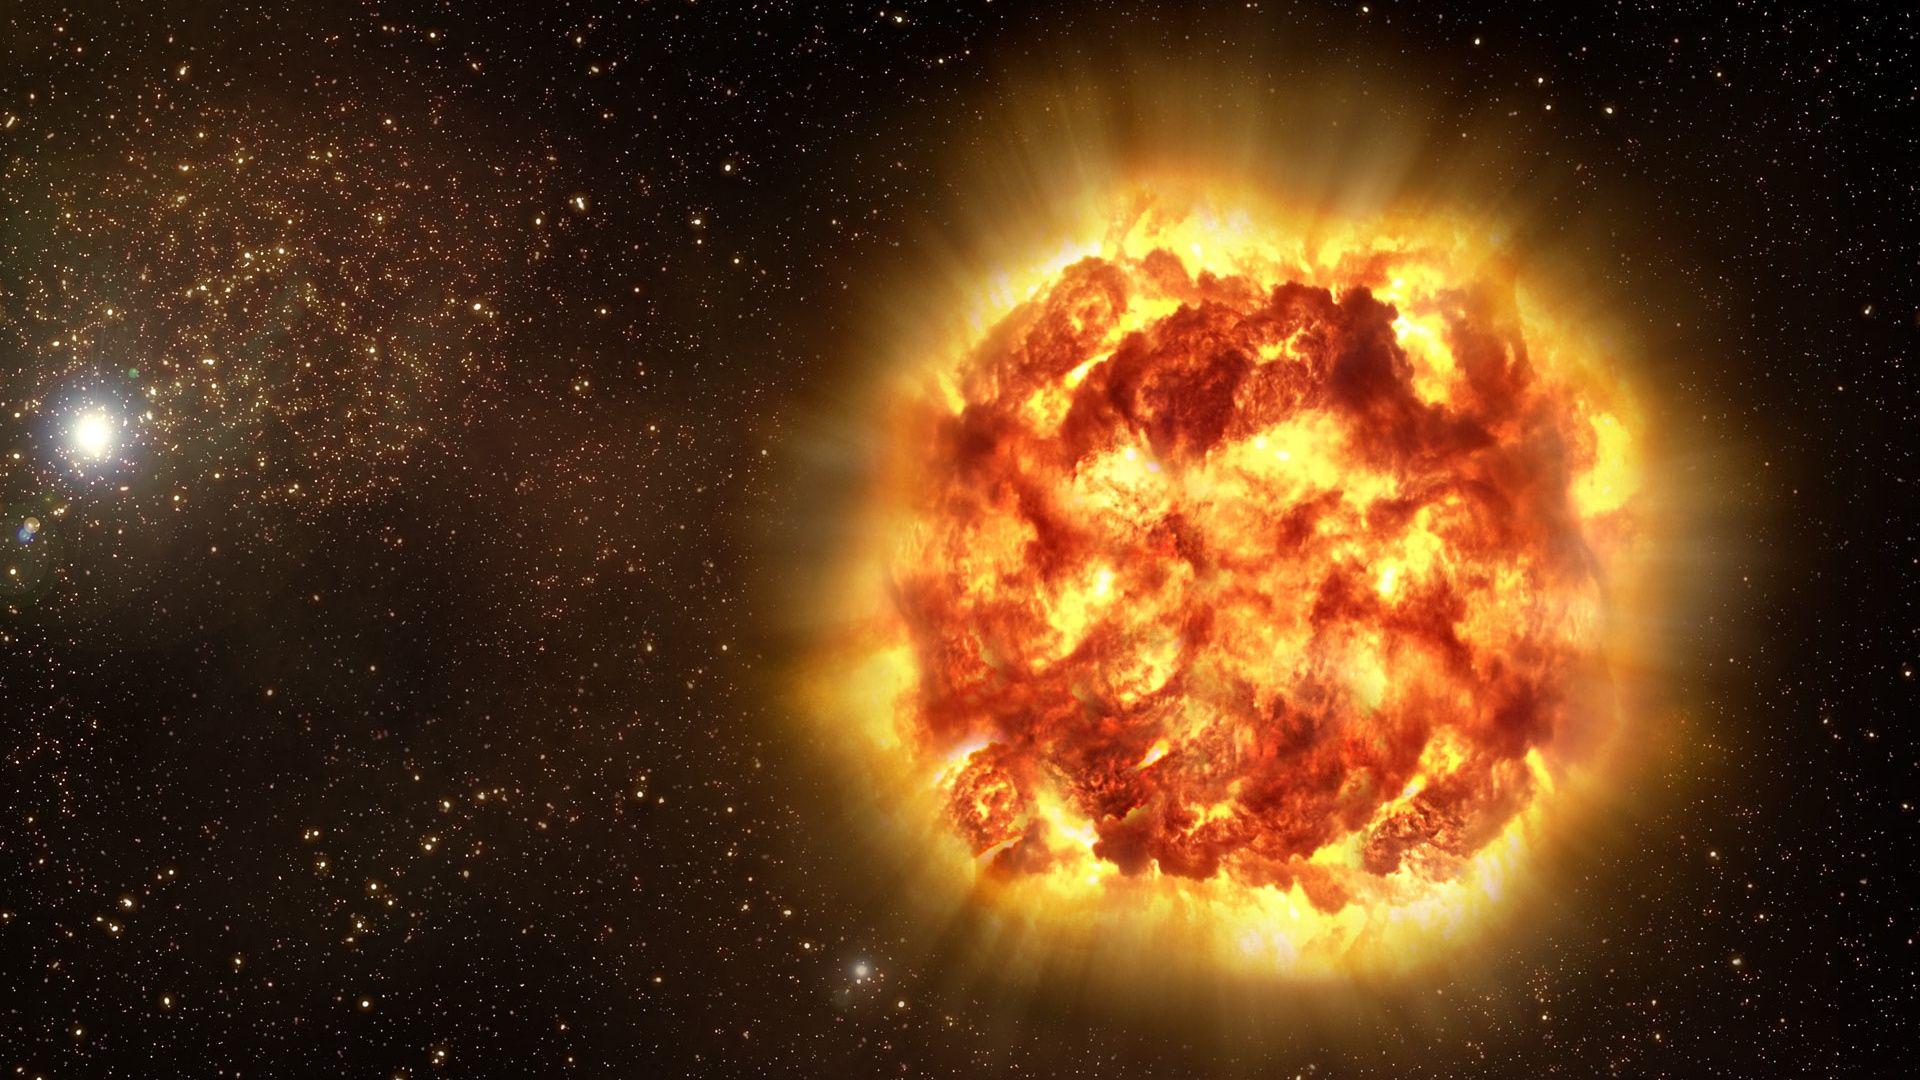 Space Supernova Star Explosion HD Wallpaper. High Definitions